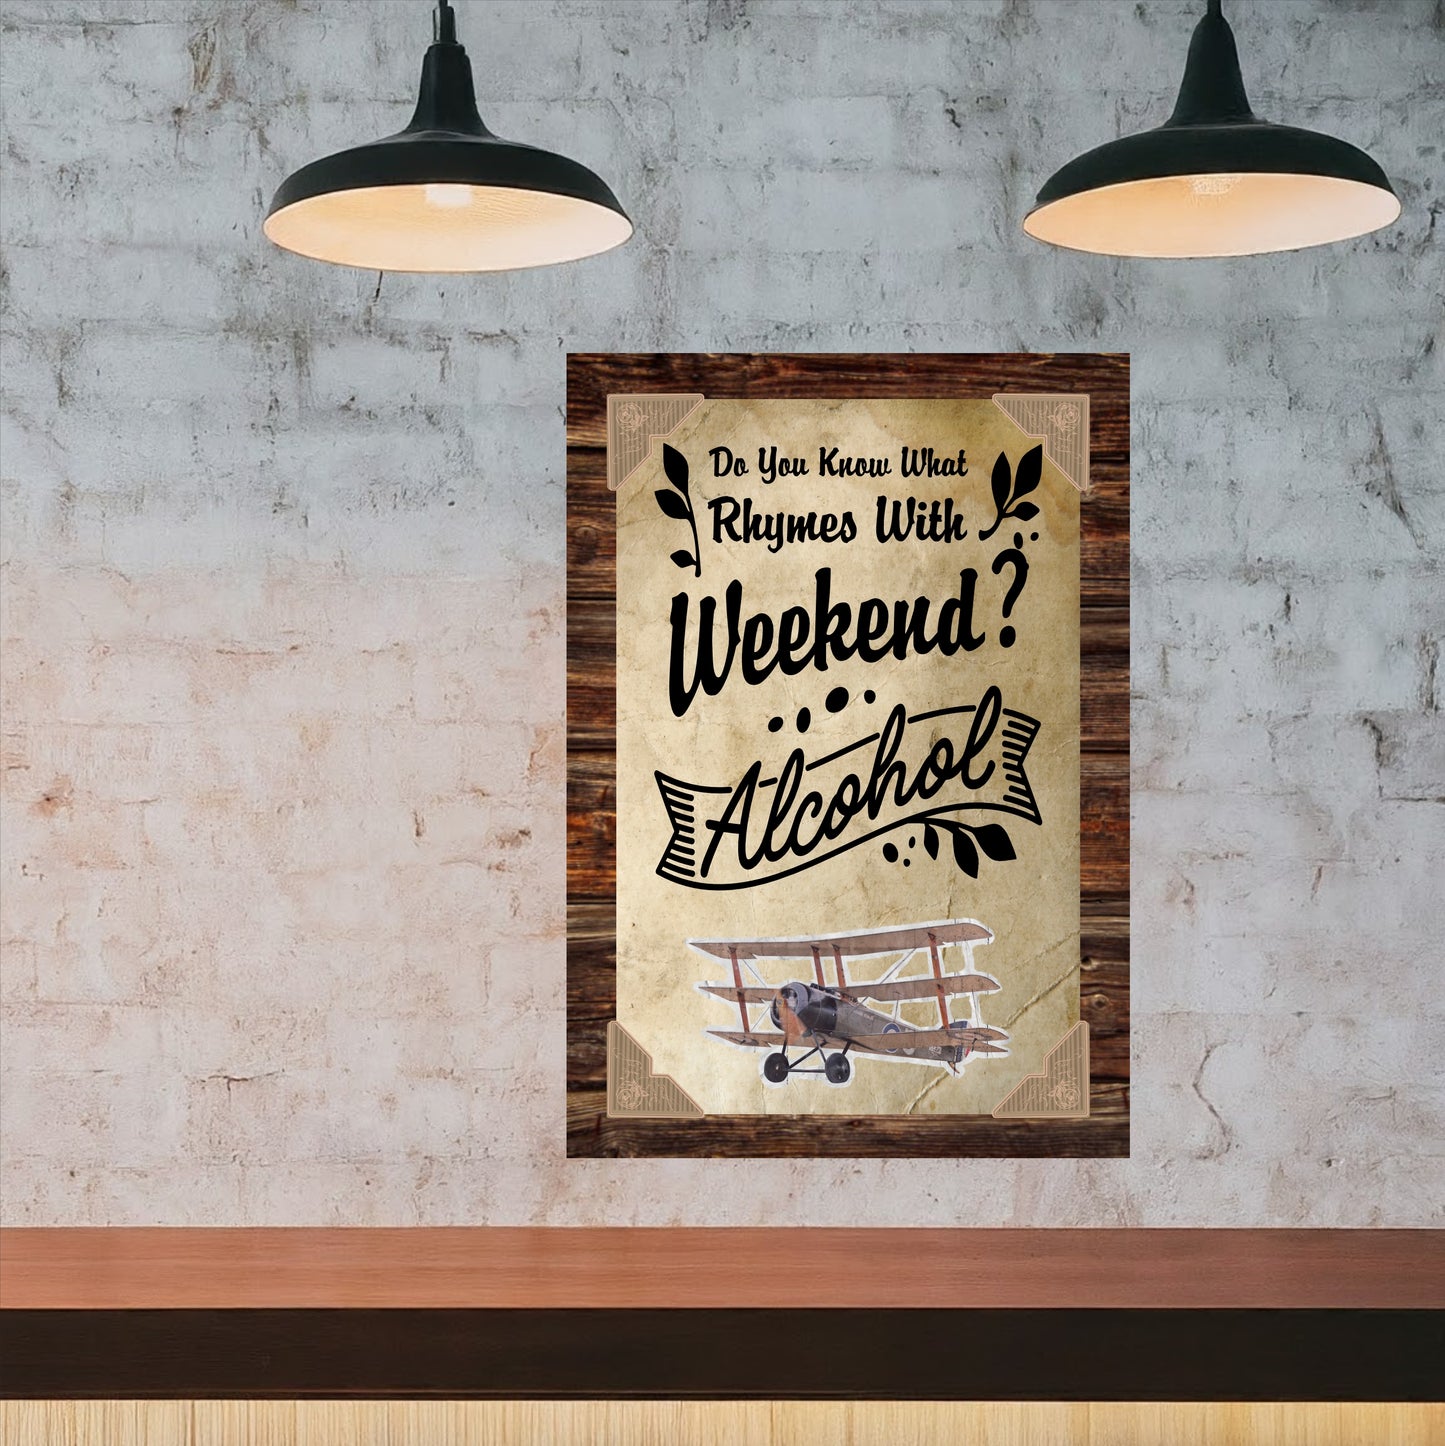 Do You Know What Rhymes With Weekend? Alcohol - 12" x 18" Vintage Metal Sign